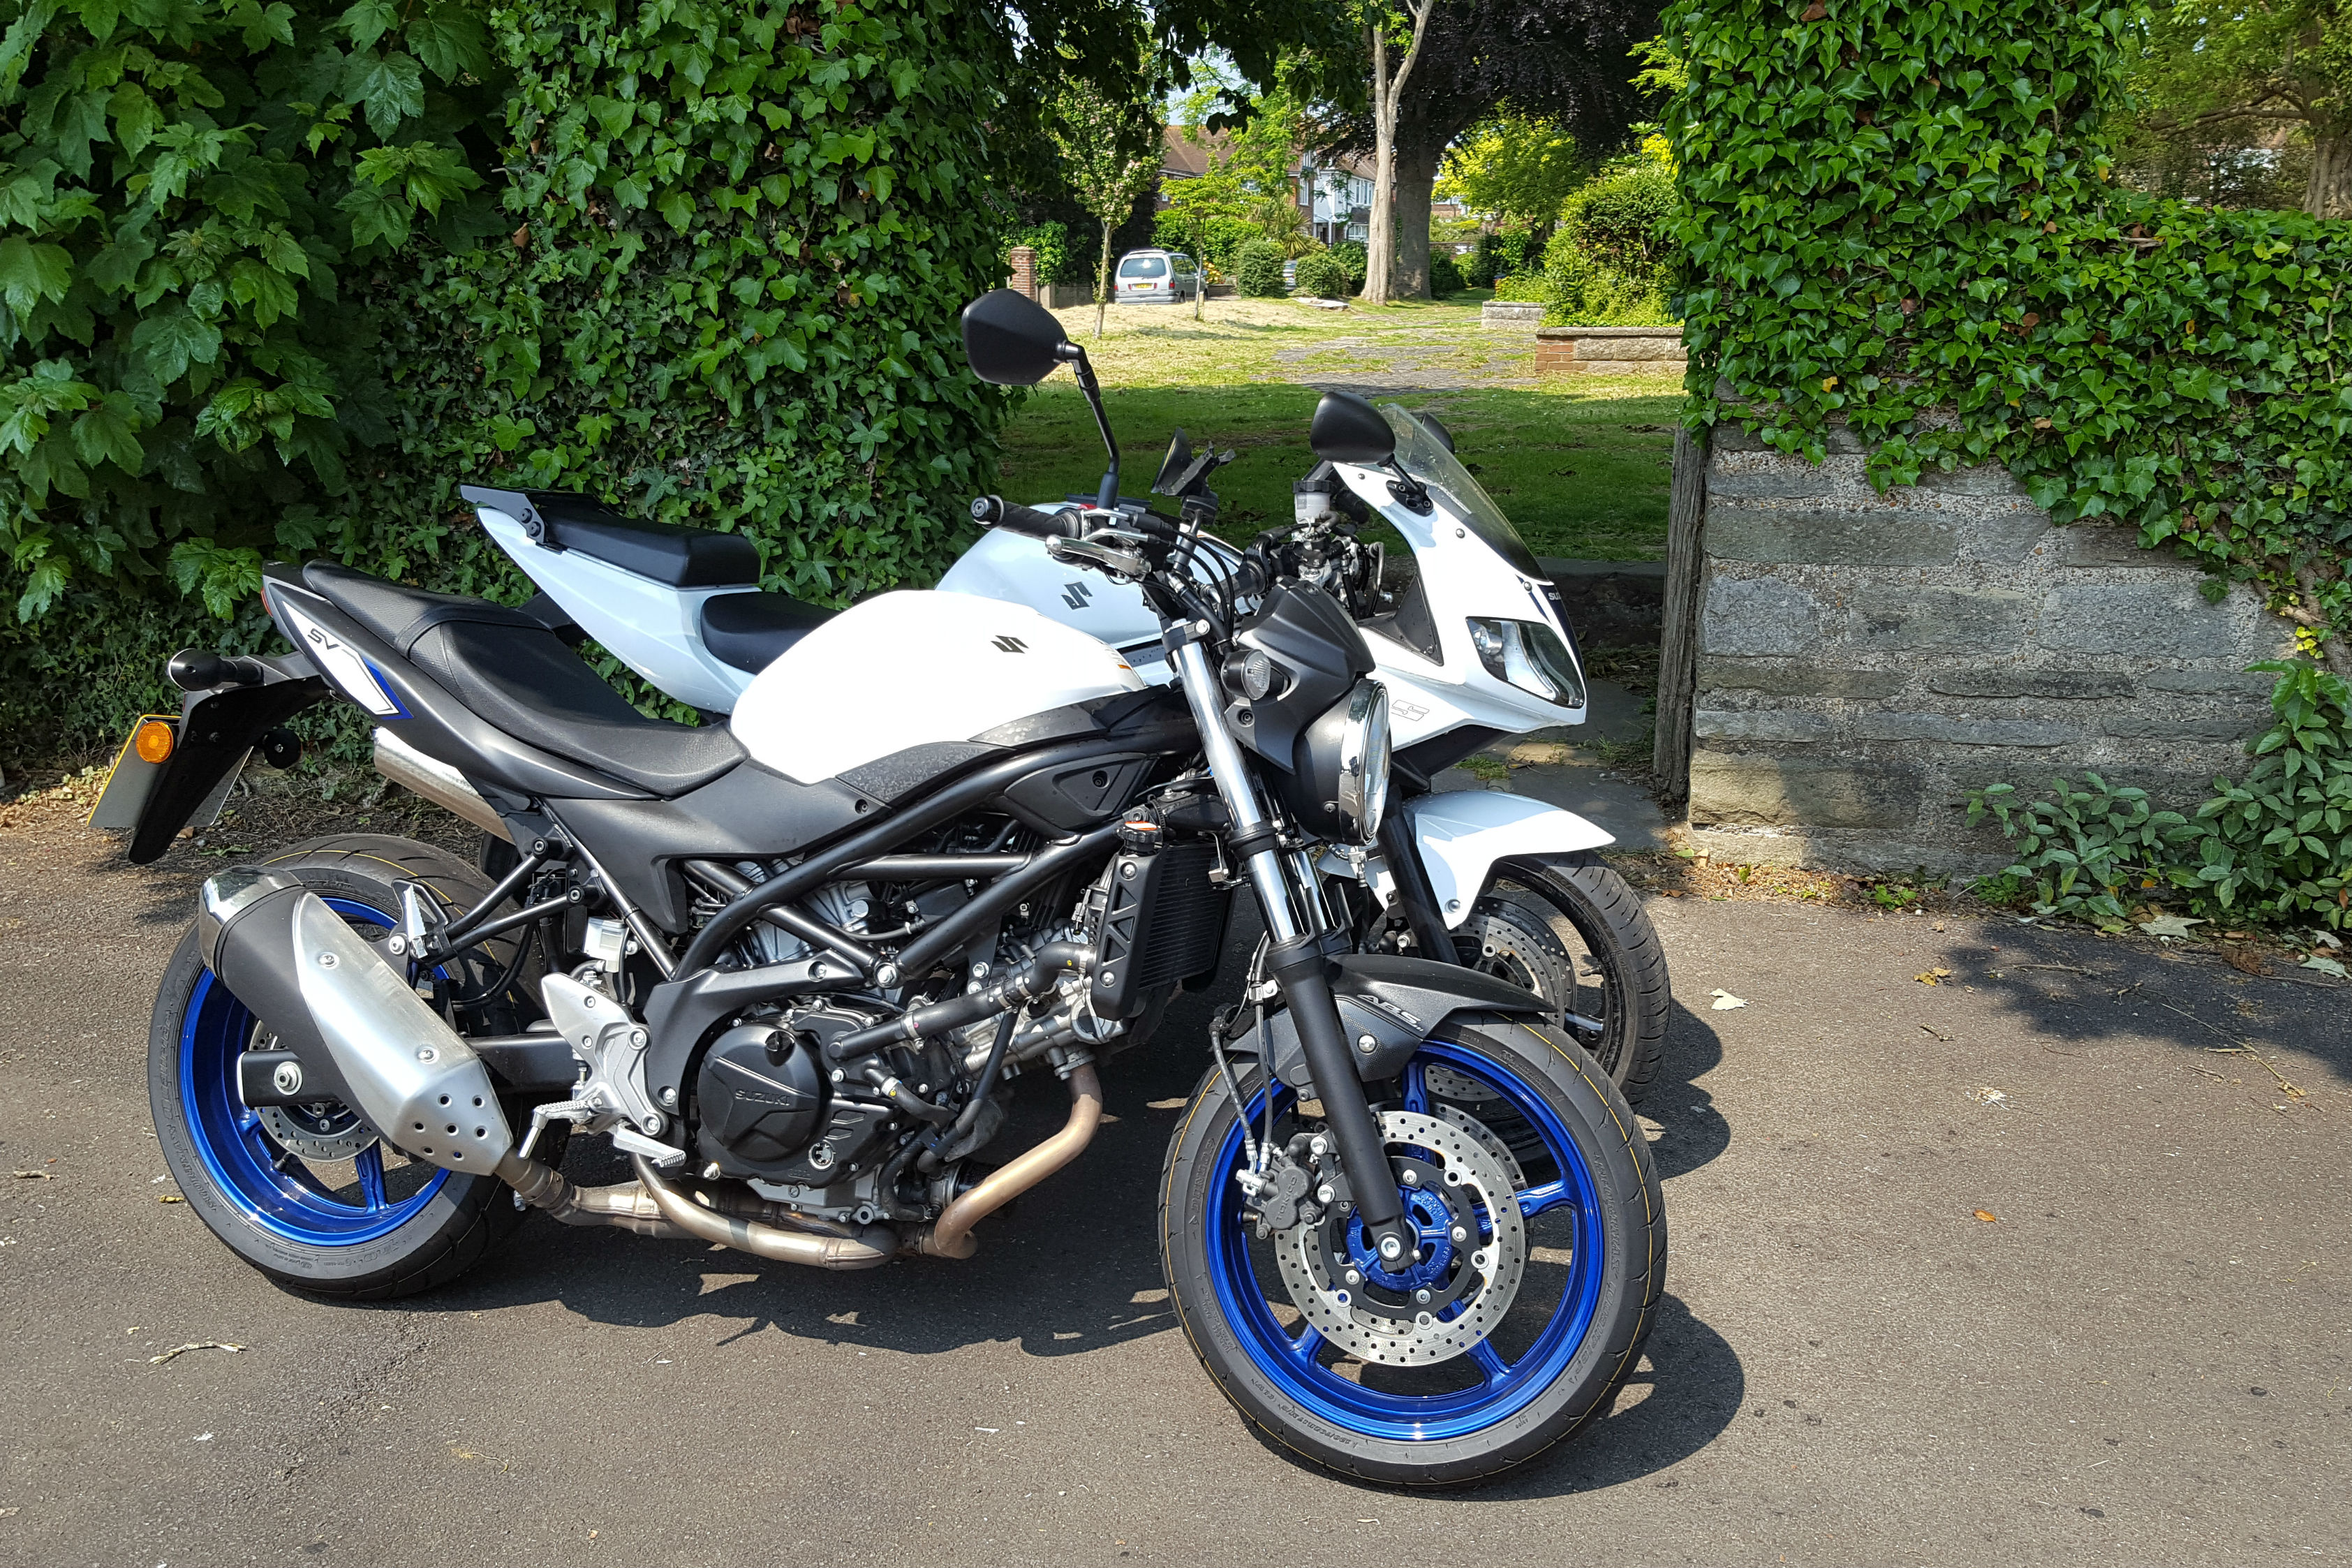 Long-term review: Suzuki SV650 old v new